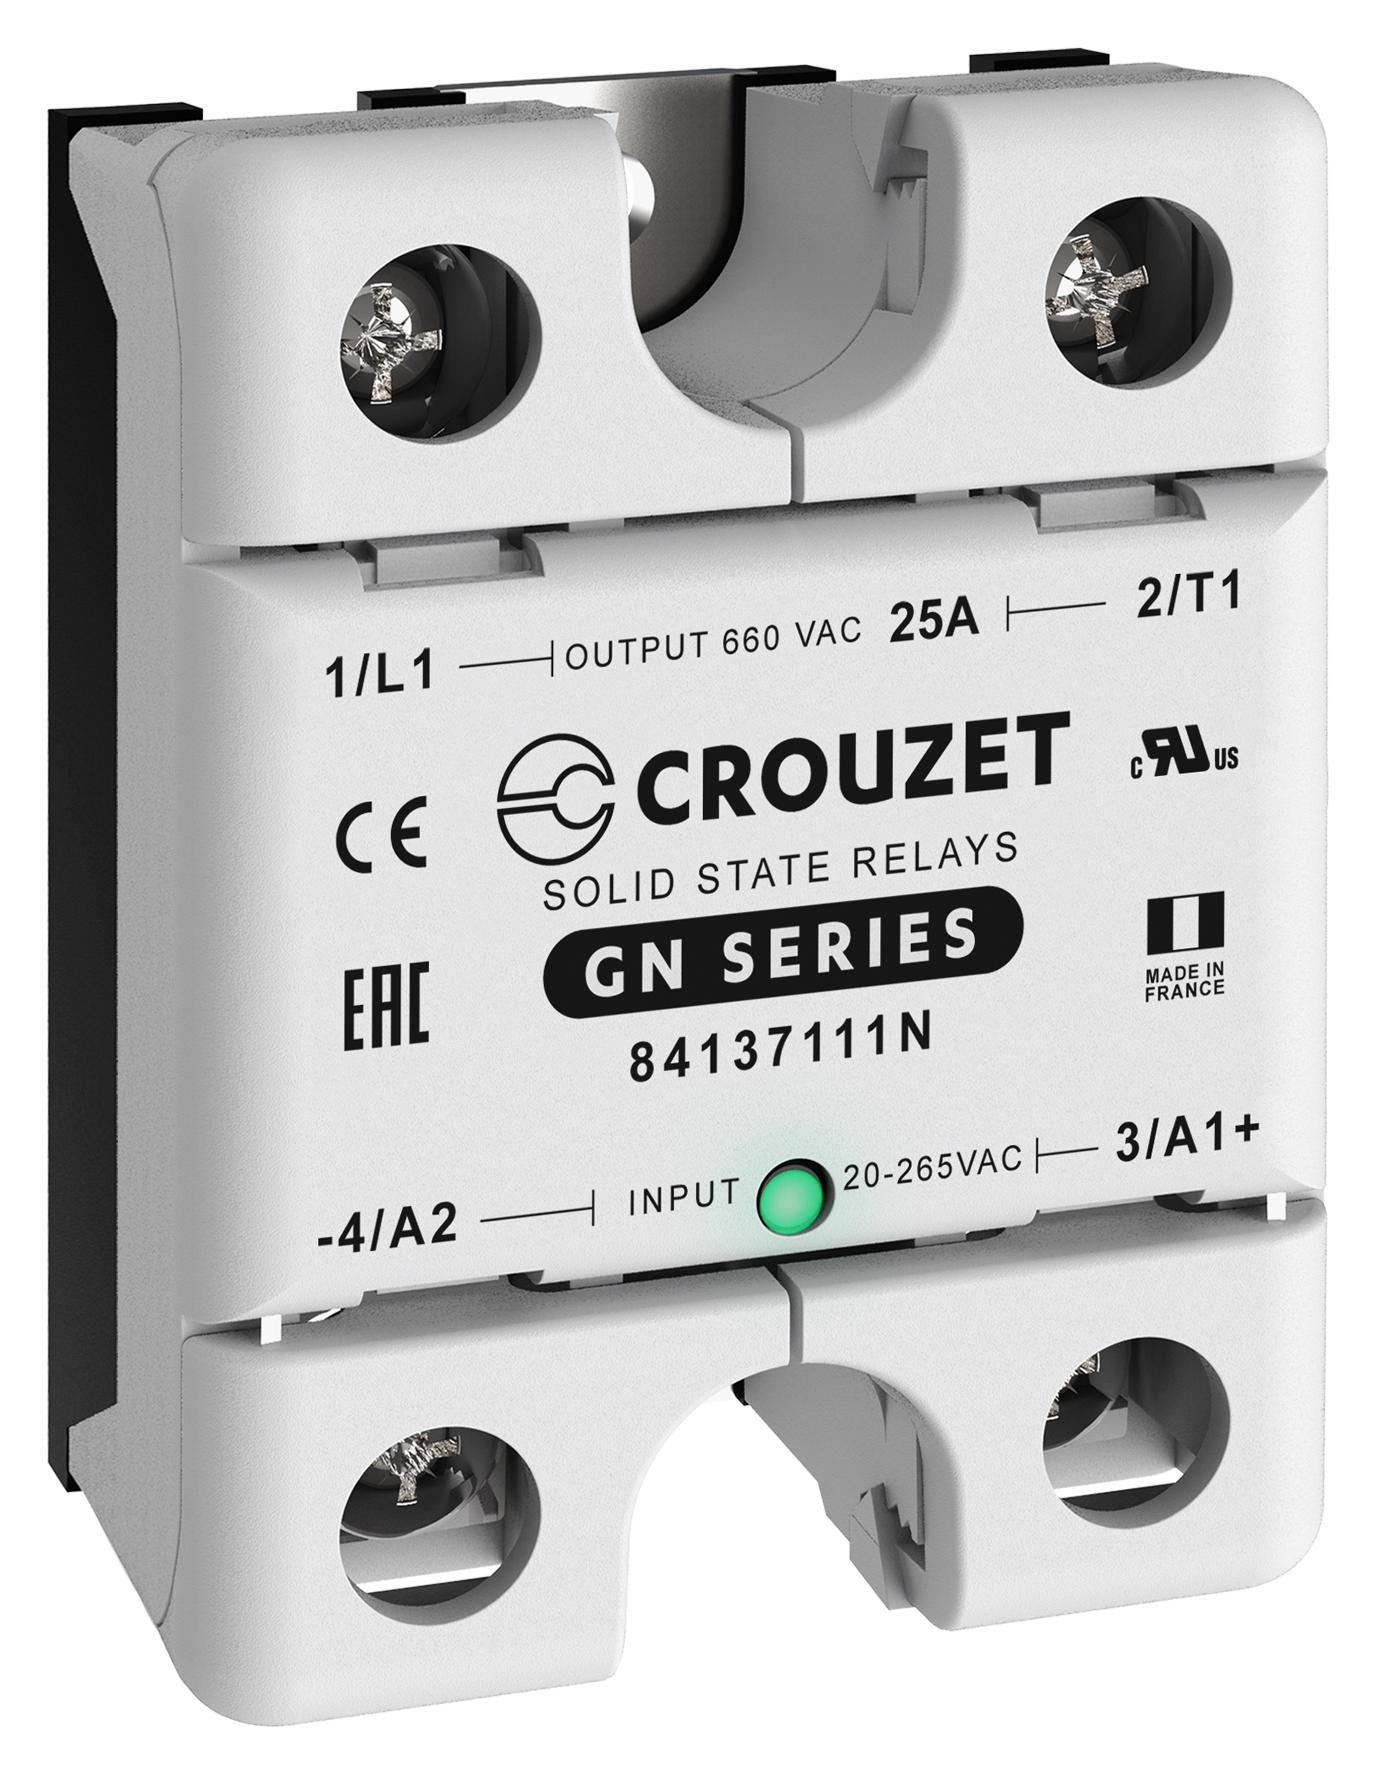 84137111N SOLID STATE RELAY, 25A, 48-660VAC, PANEL CROUZET